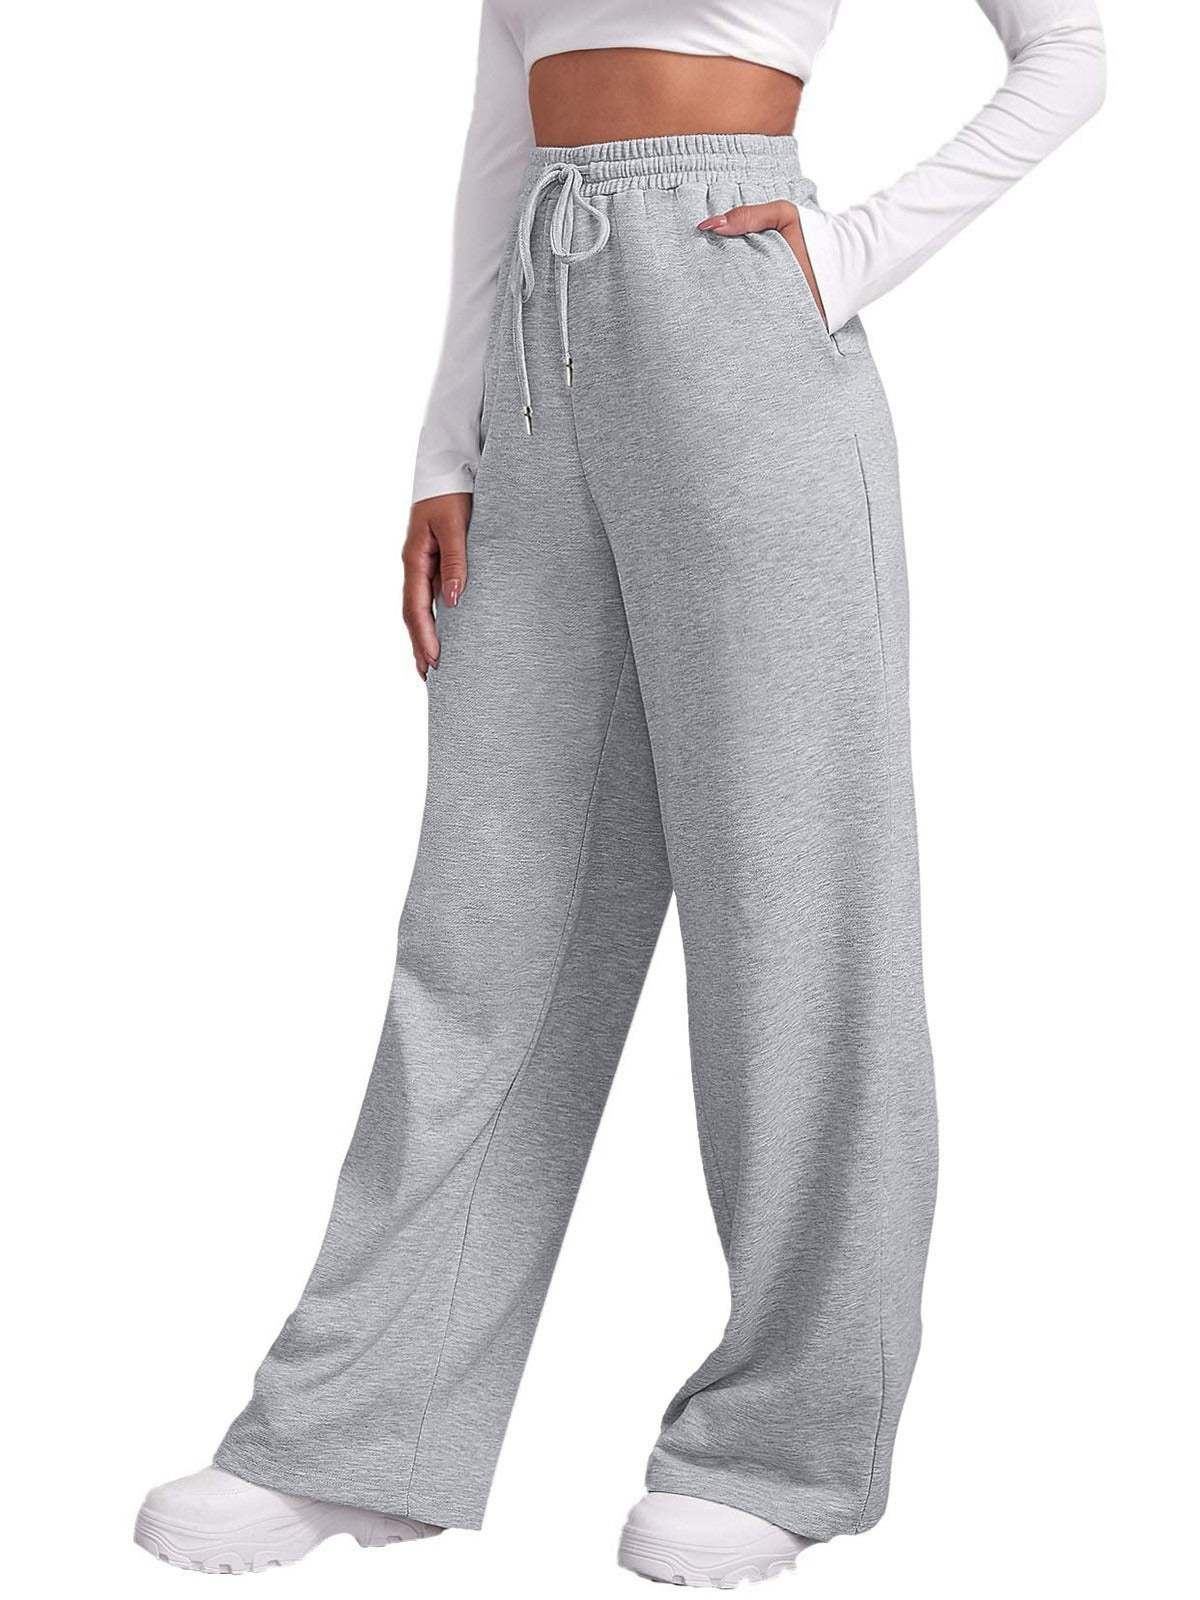 Women's Casual Loose Solid Color Sweatpants